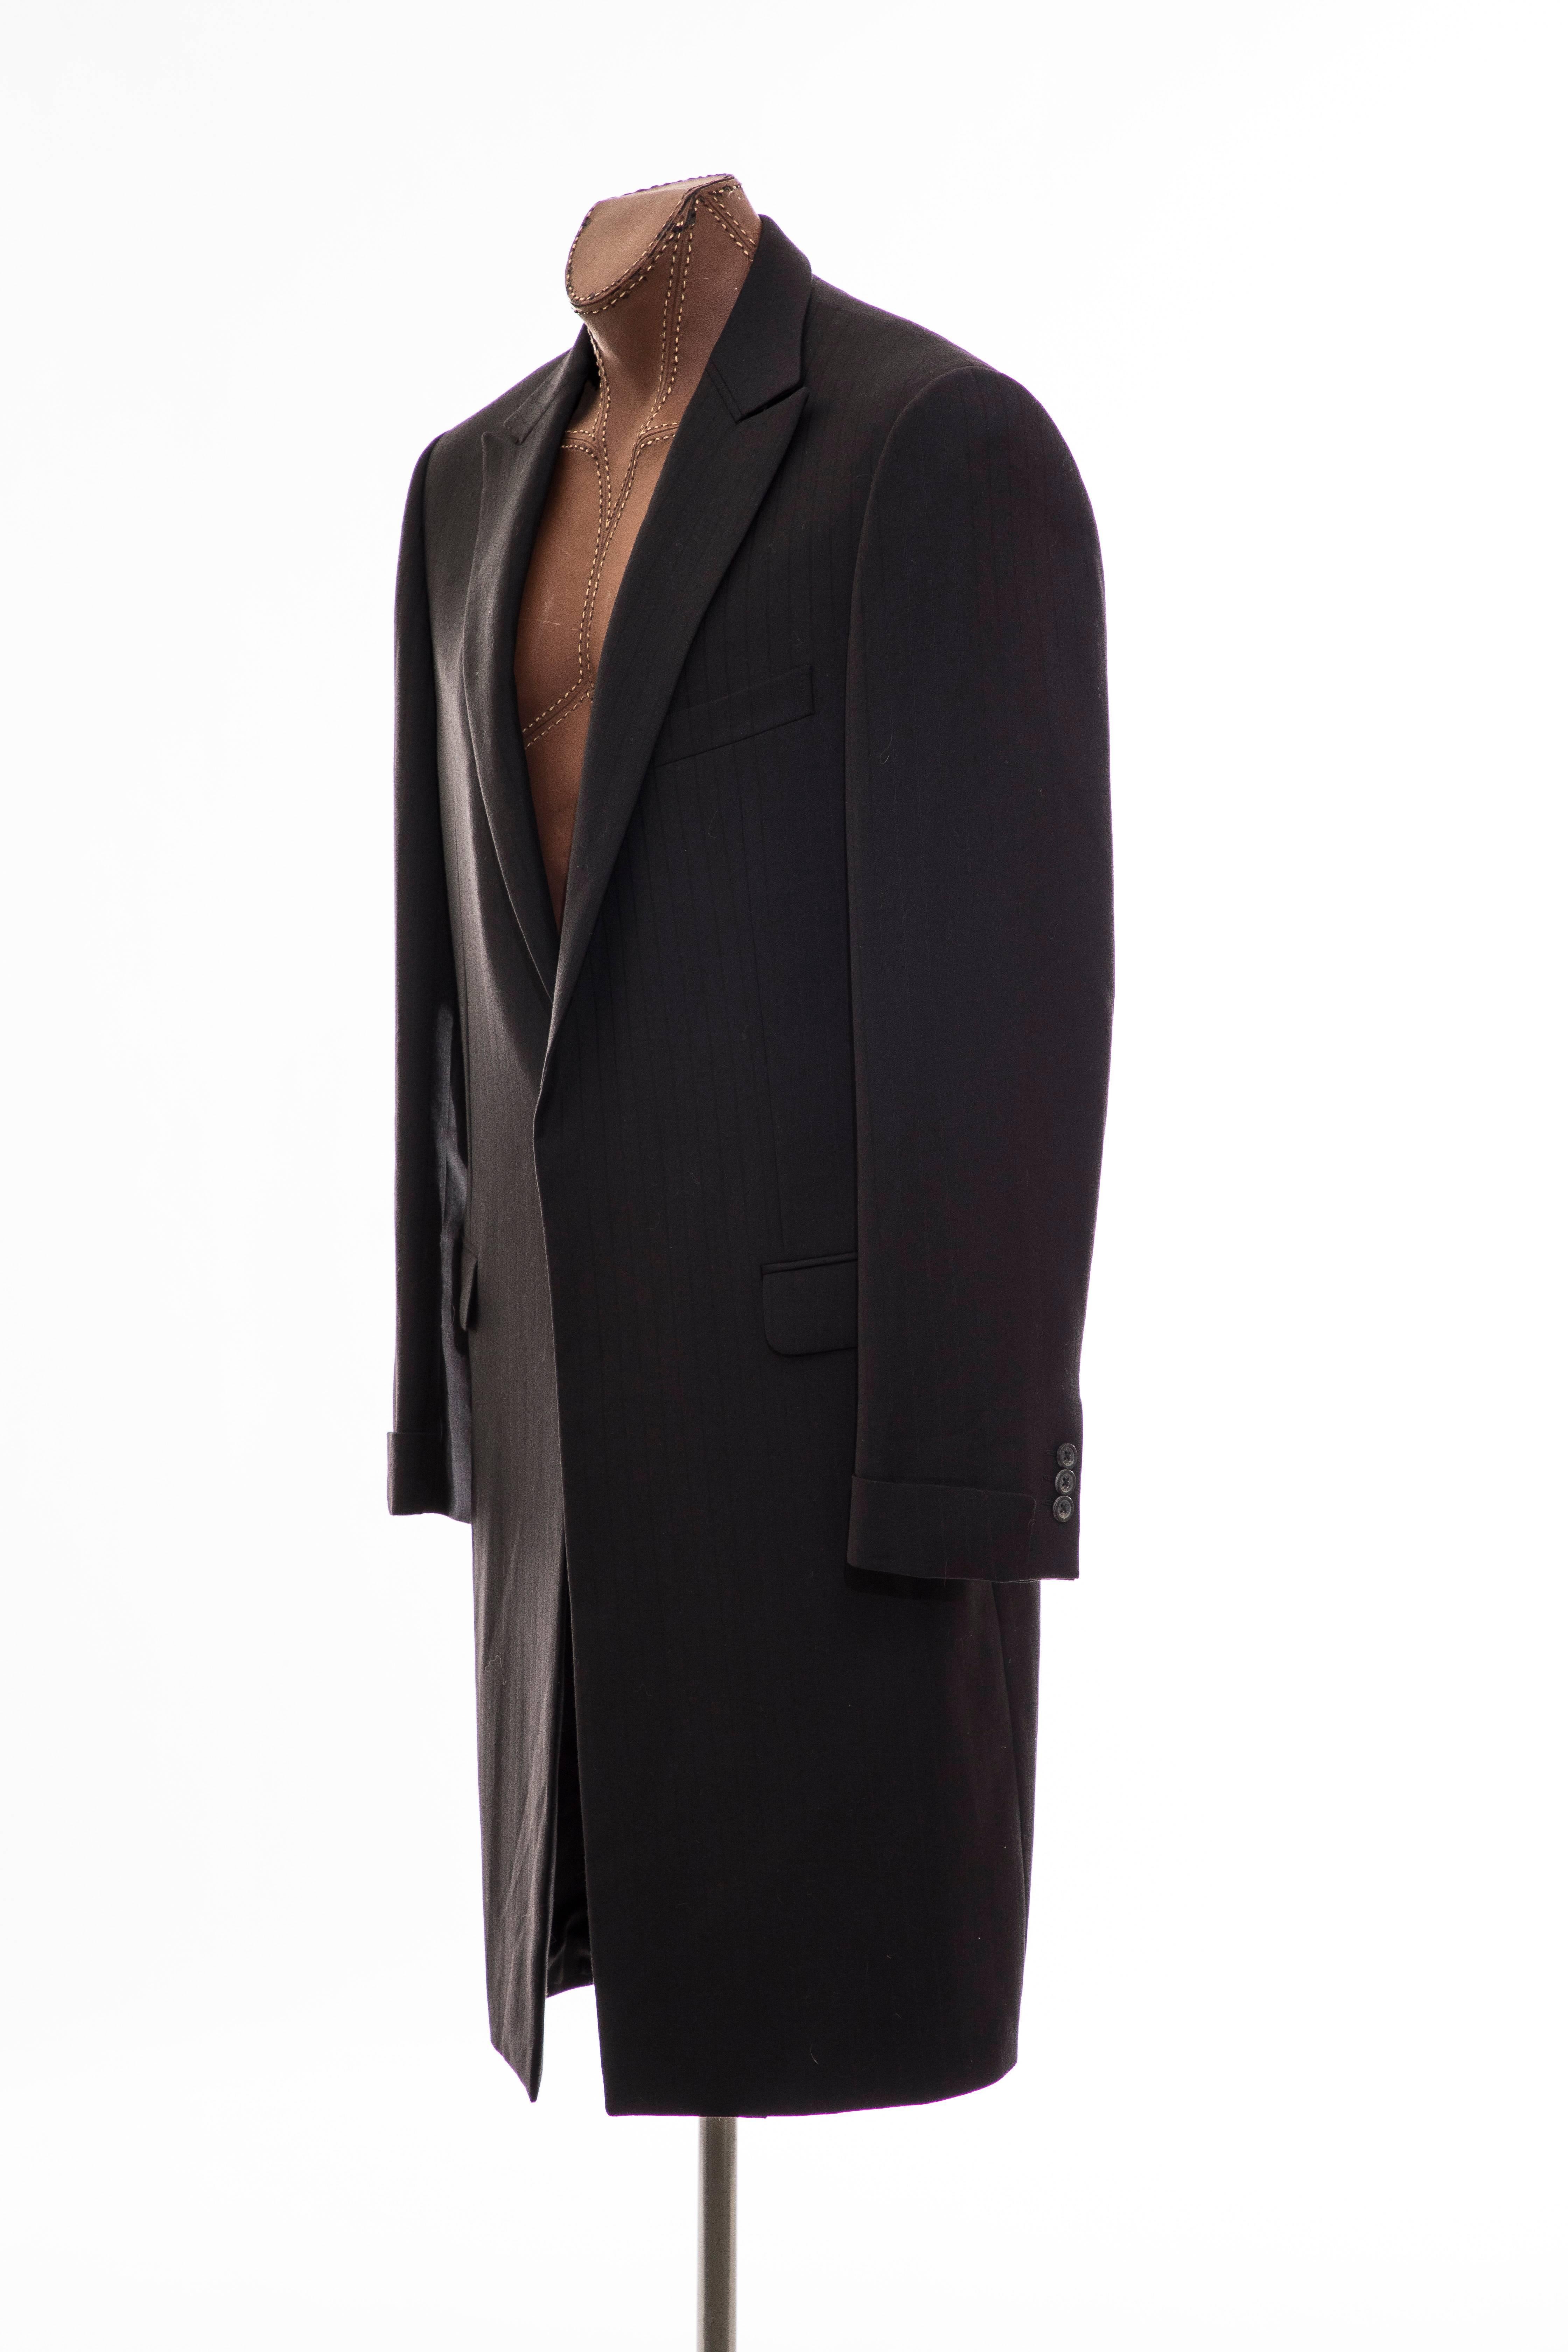 Gianni Versace Couture Men's Black Pinstriped Wool Overcoat, Circa 1990's For Sale 3